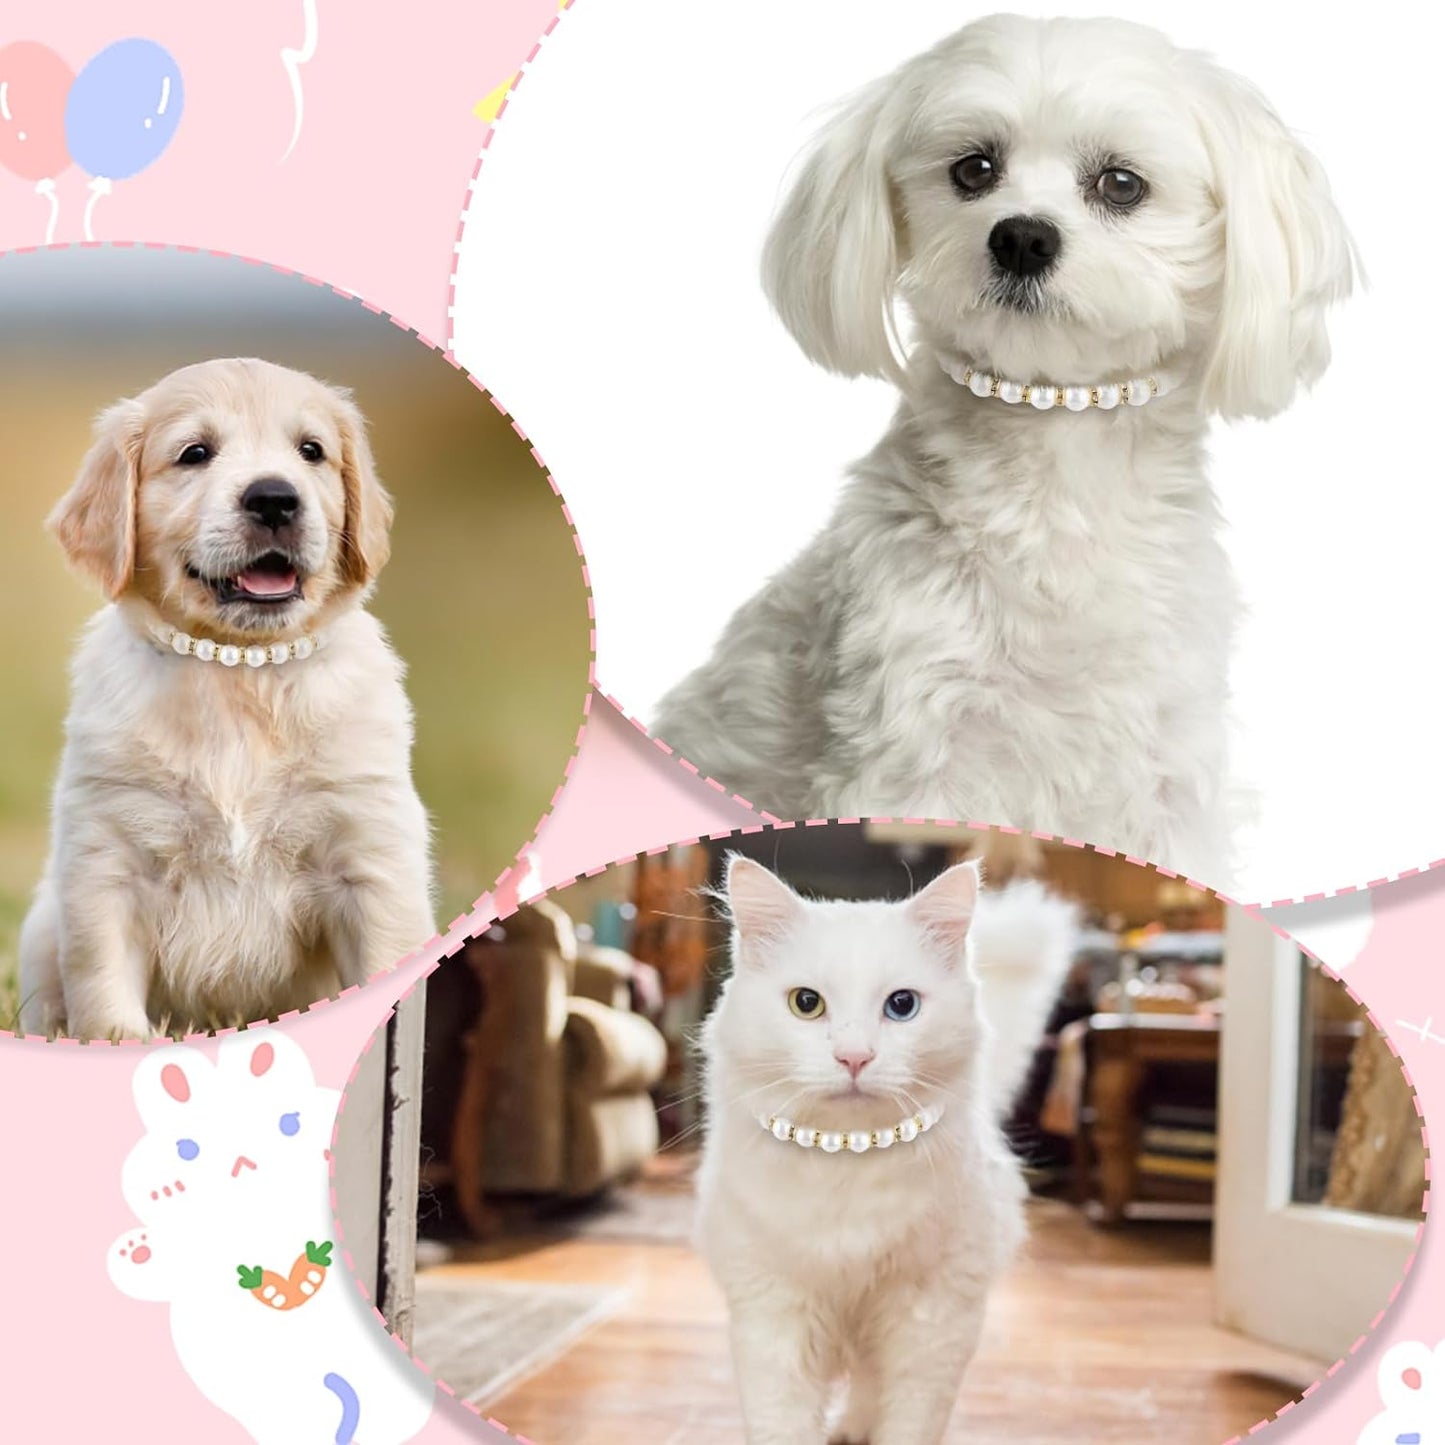 Dog Cat Pearl Collar Necklace, Adjustable Beaded Pet Collars Delicate Cat Wedding Collar Jewelry for Girl Cat Puppy Dogs Accessories (Gold)